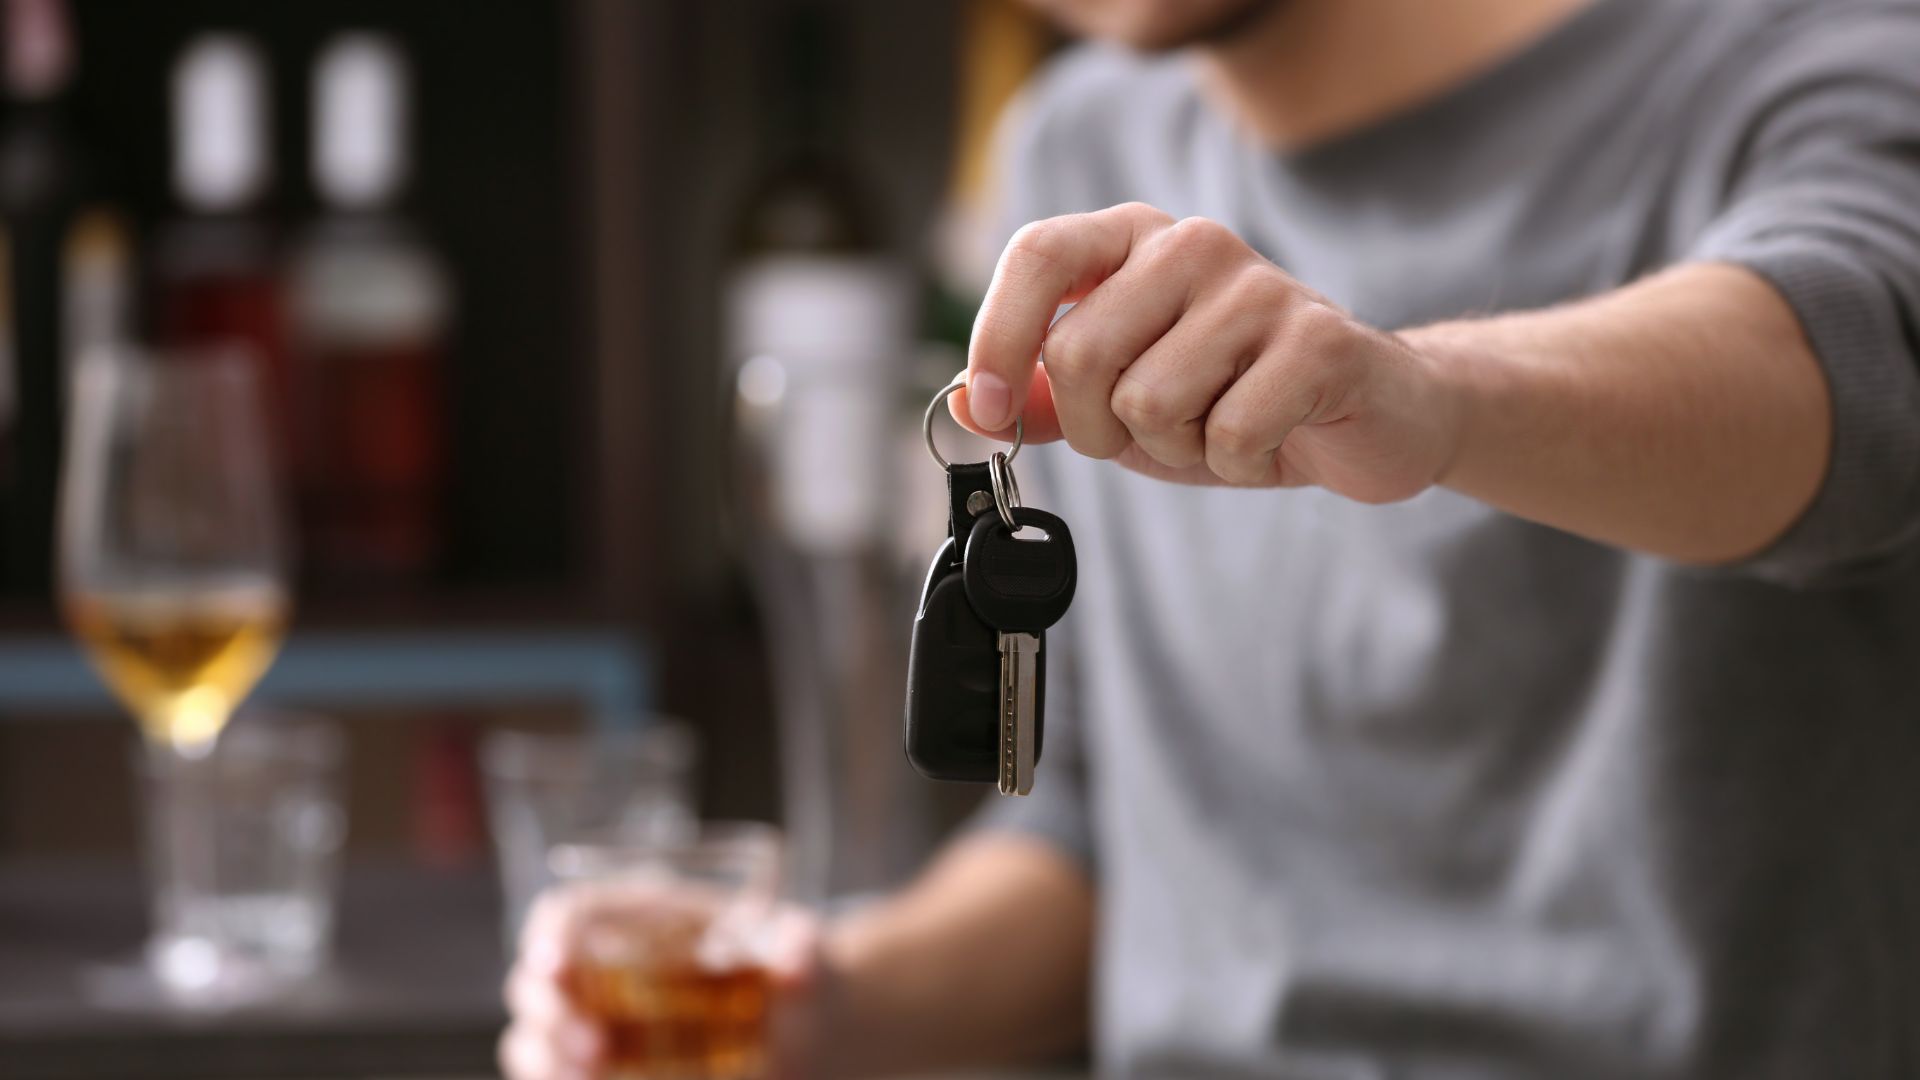 England should lower drink drive limit, scotland says